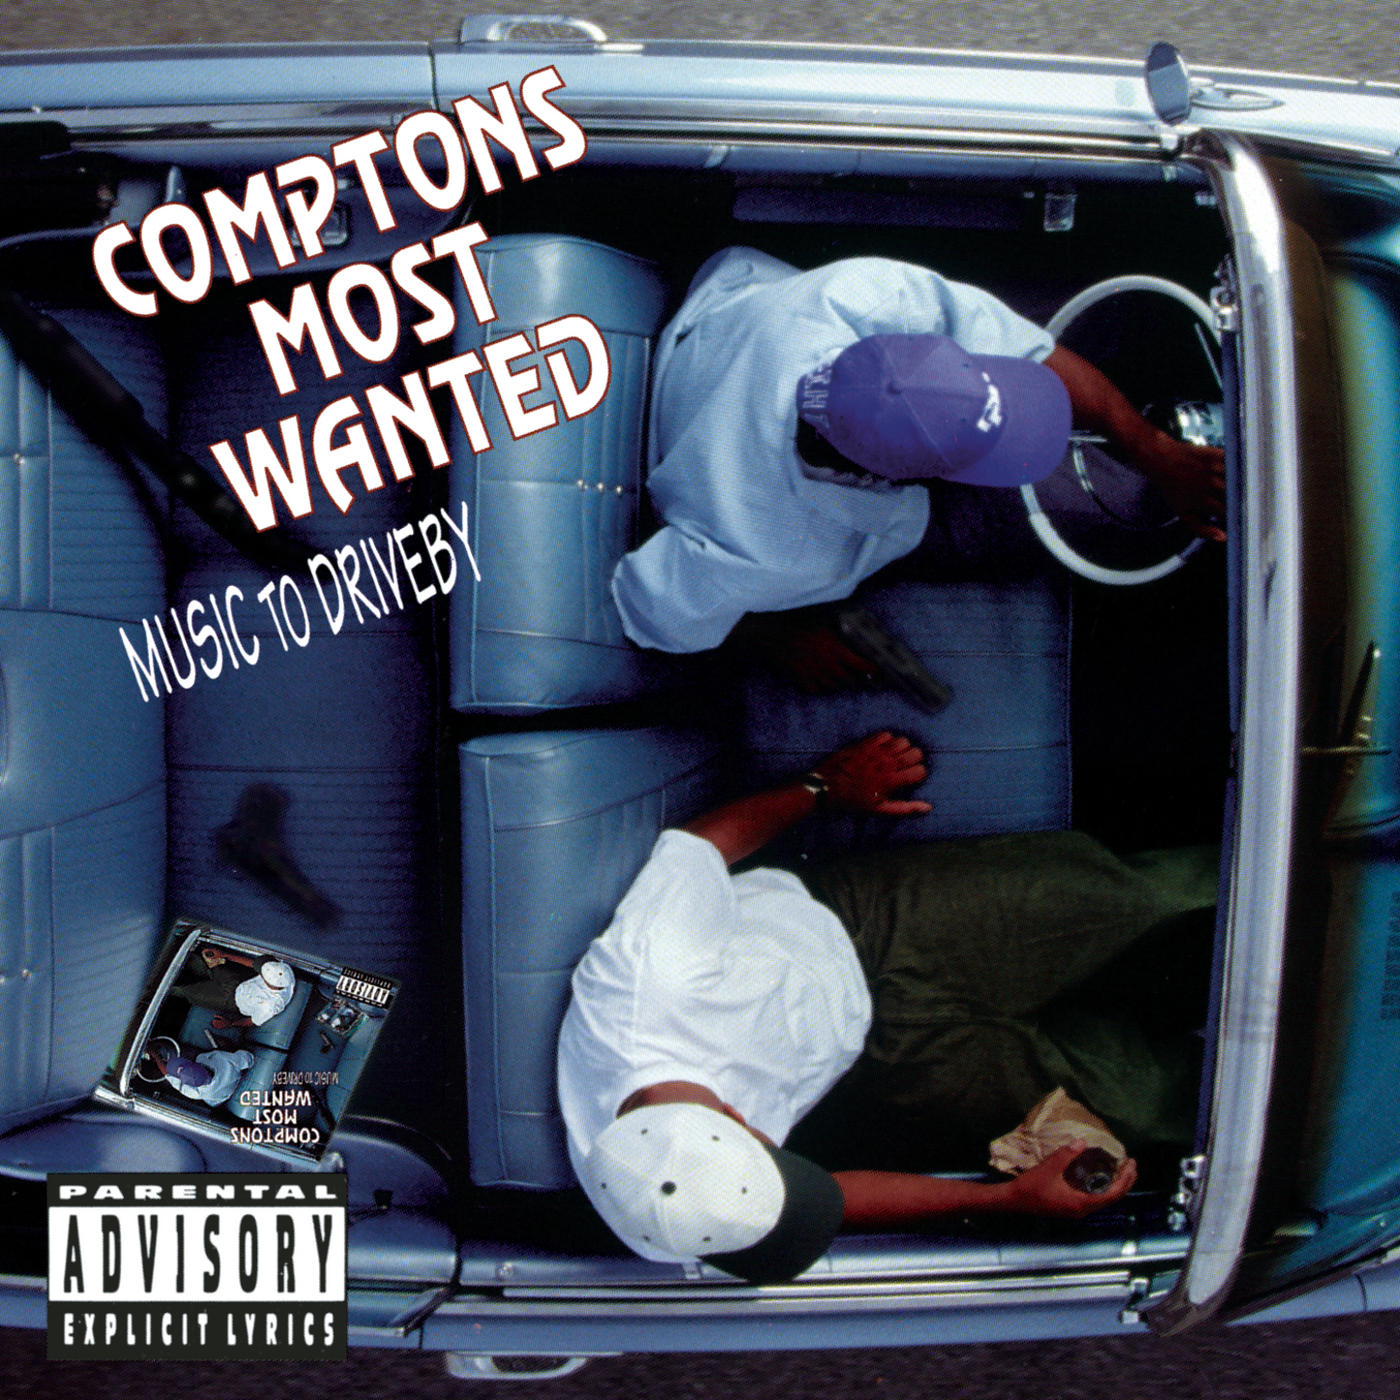 COMPTON'S MOST WANTED | 'Music To Driveby' LP